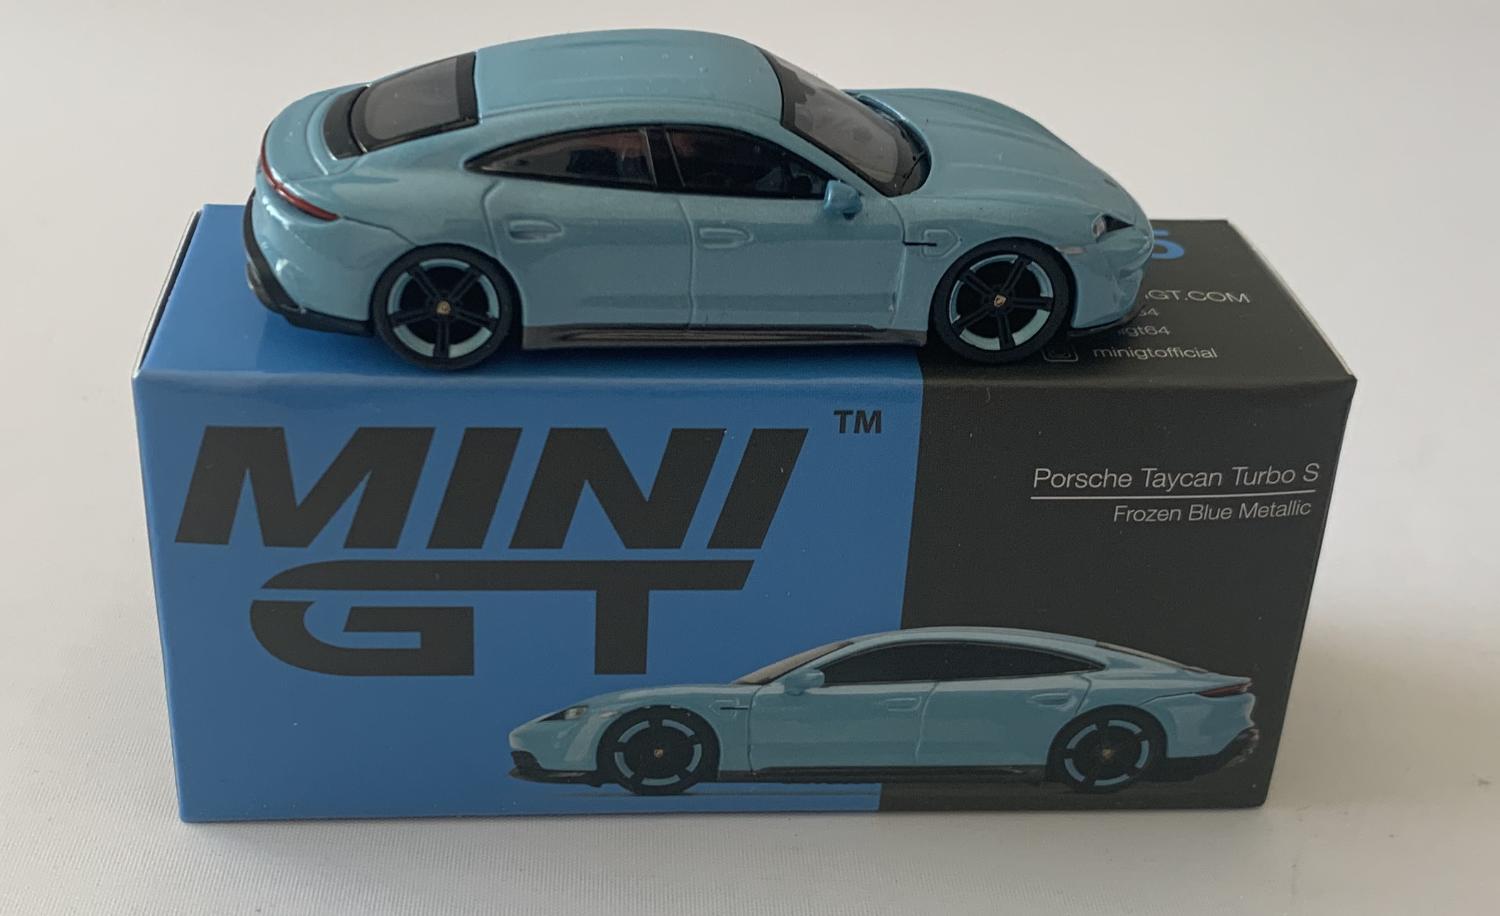 cated and sits on the front bonnet with the lettering Porsche Taycan Turbo S on the rear.  The Porsche badge also extends to the wheel hubs.  A good reproduction of the Porsche Taycan Turbo S with detail throughout, all authentically recreated. The model is presented in a box, the car is approx. 8 cm long and the box is 10 cm long